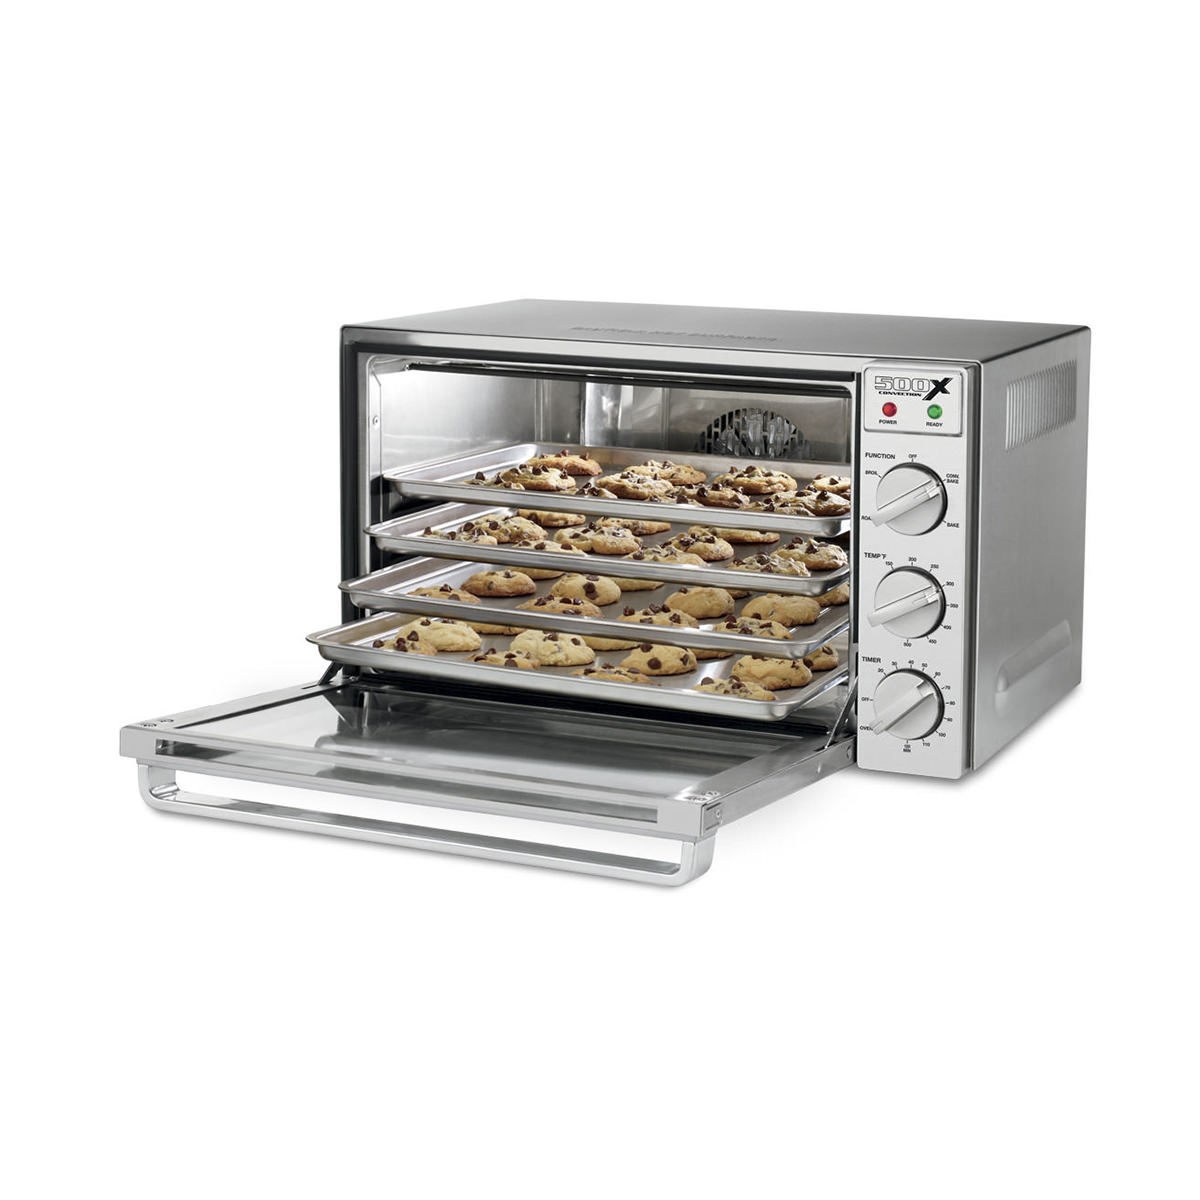 Never Used Details about   BKI MT200 Commercial Half Size Counter Top Convection Oven 